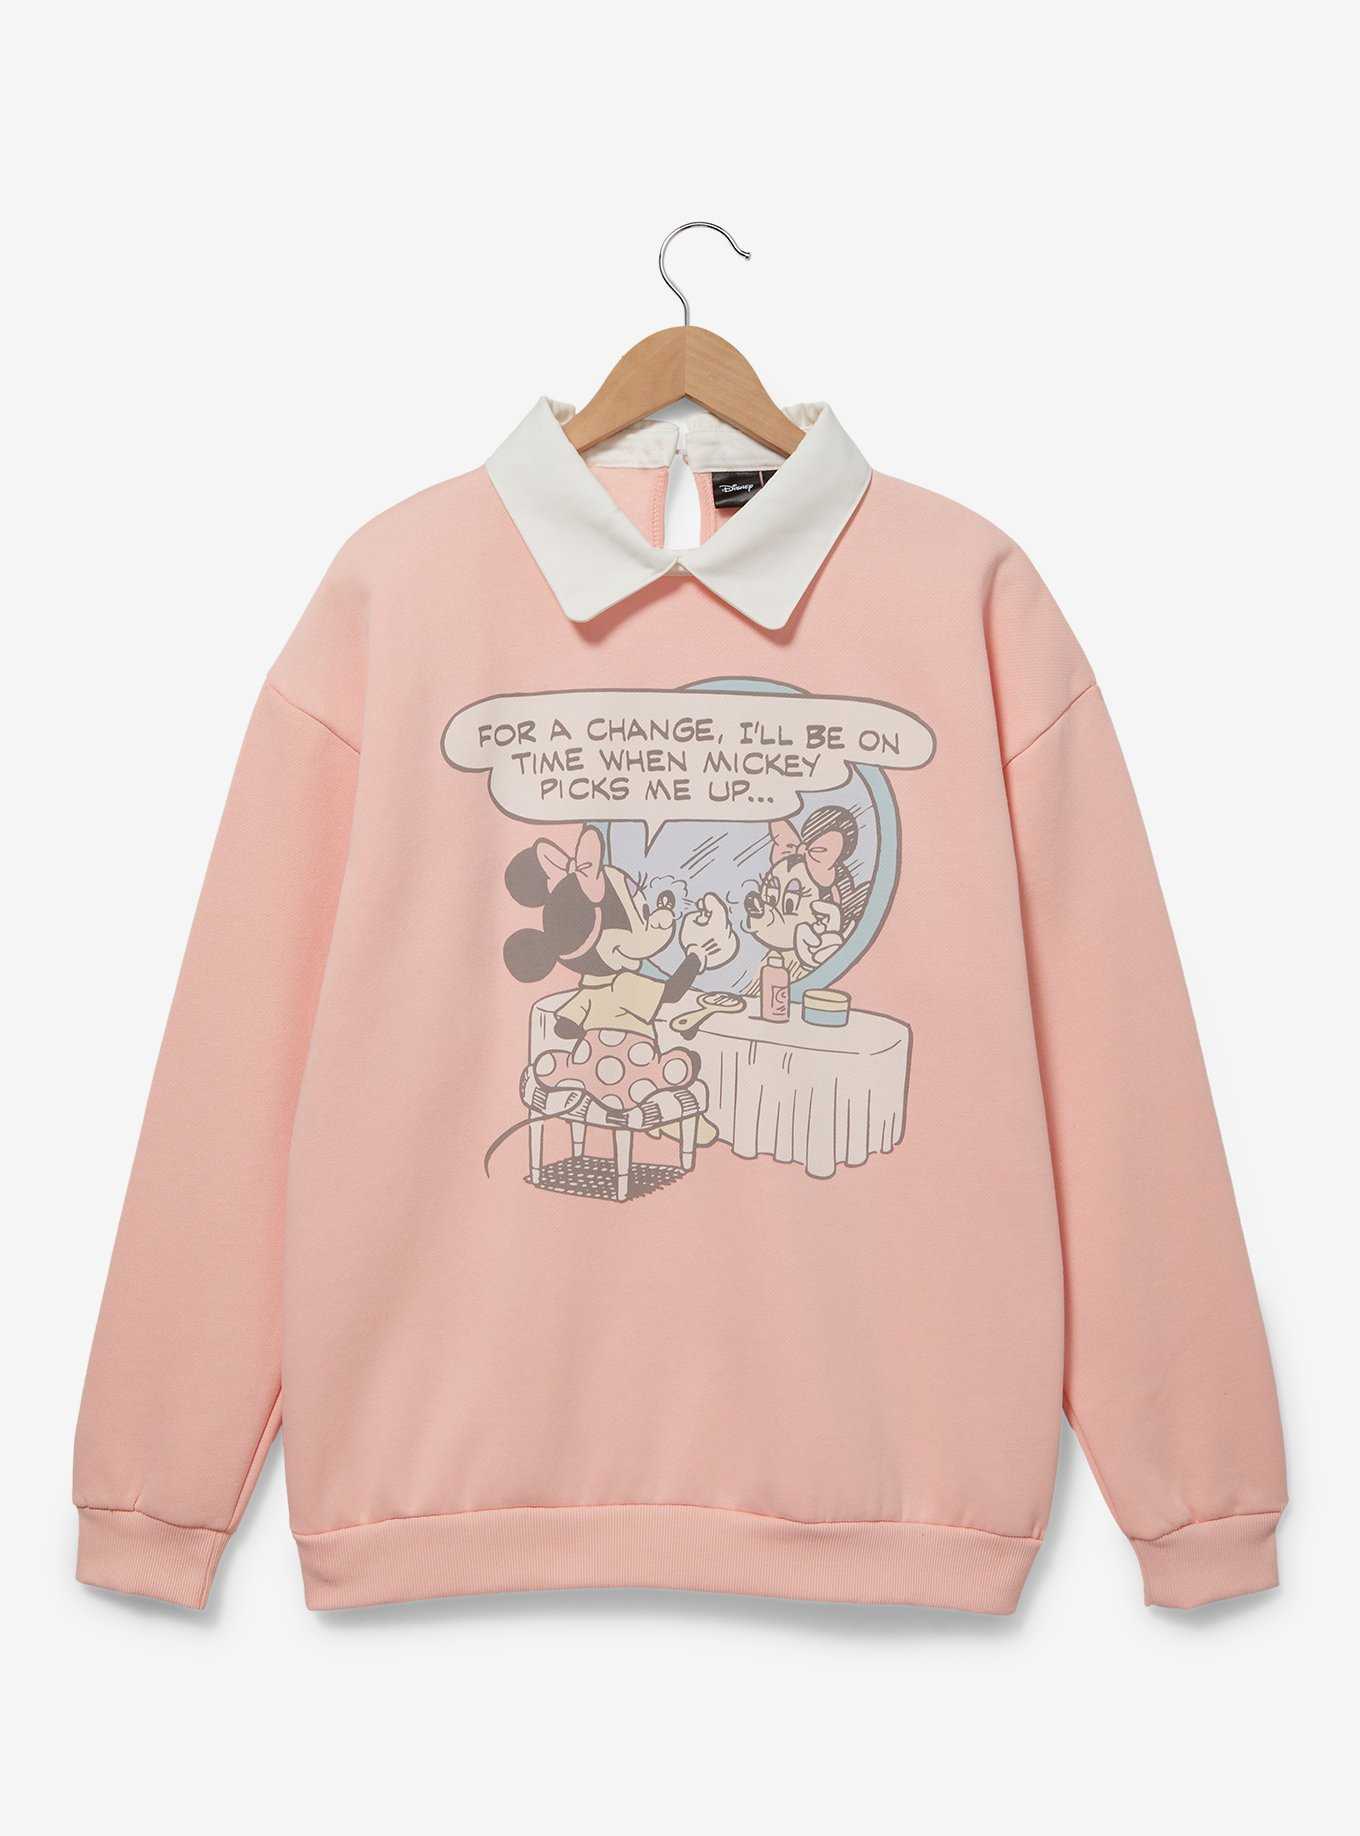 OFFICIAL Minnie Mouse Hoodies & Sweaters